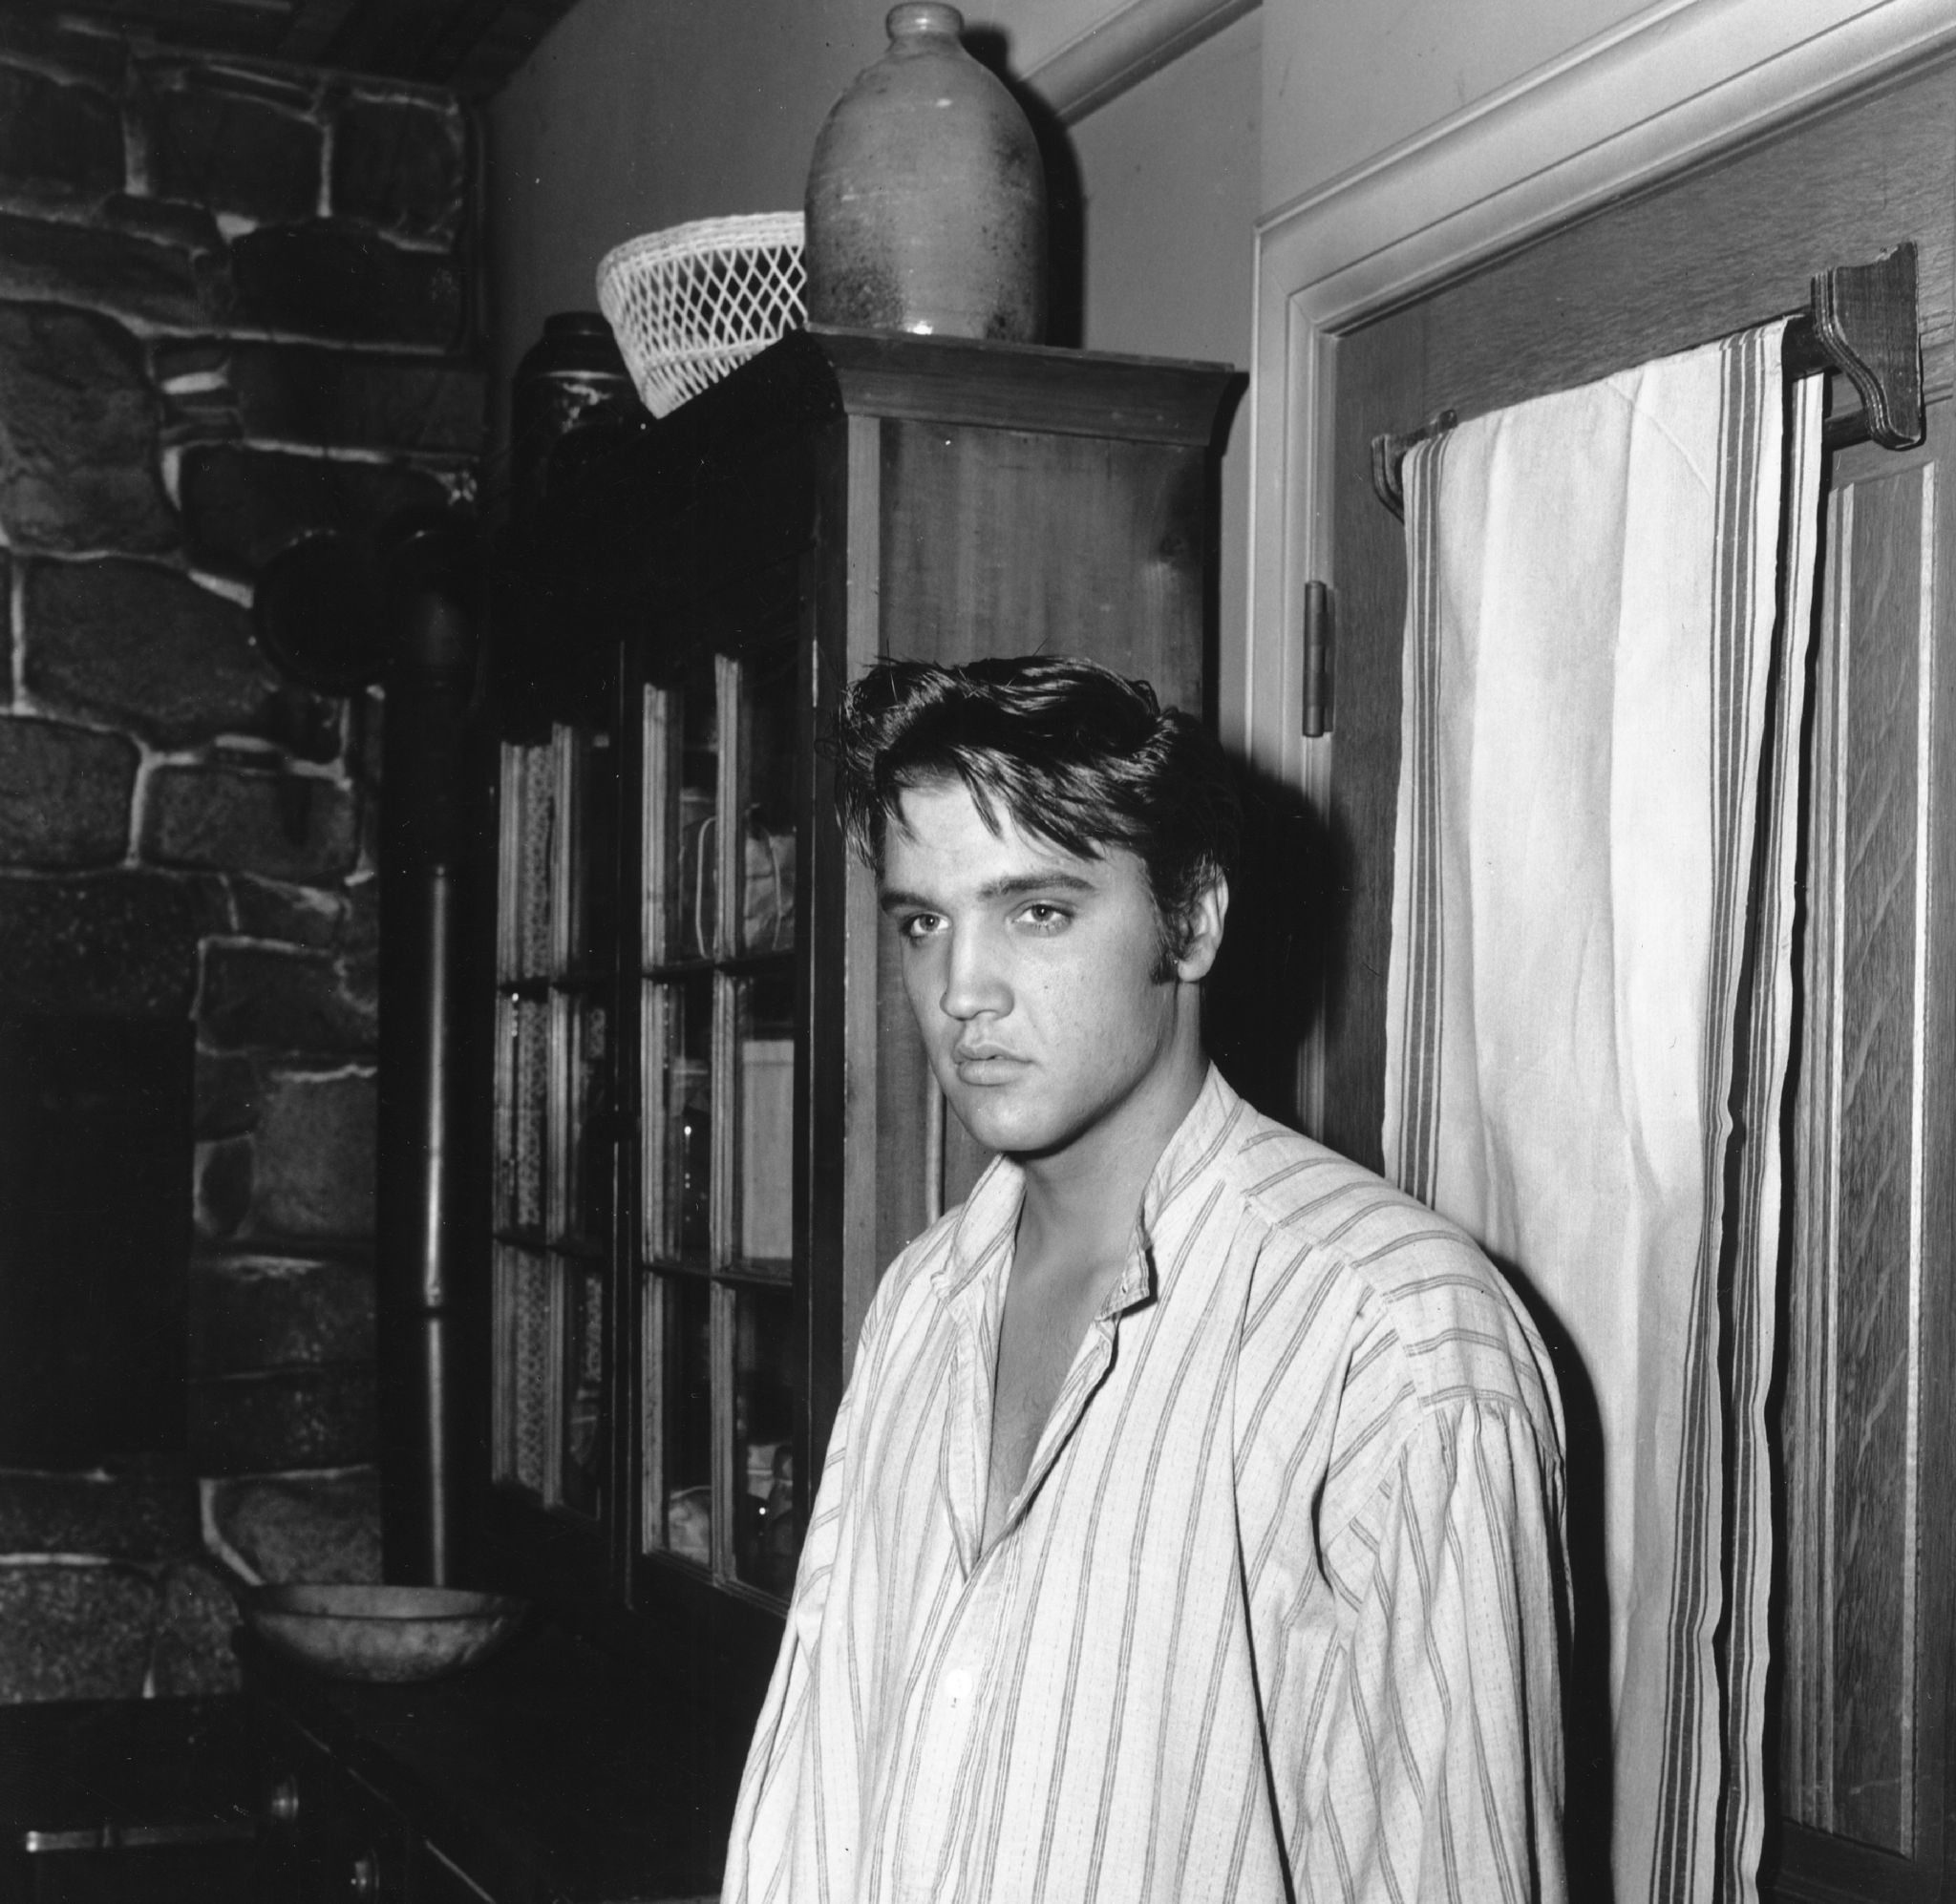 malibu, ca   august 1956 rock and roll singer and actor elvis presley on the set of his film love me tender in august 1956 at the 20th century fox ranch, malibu creek state park, california photo by michael ochs archivesgetty images